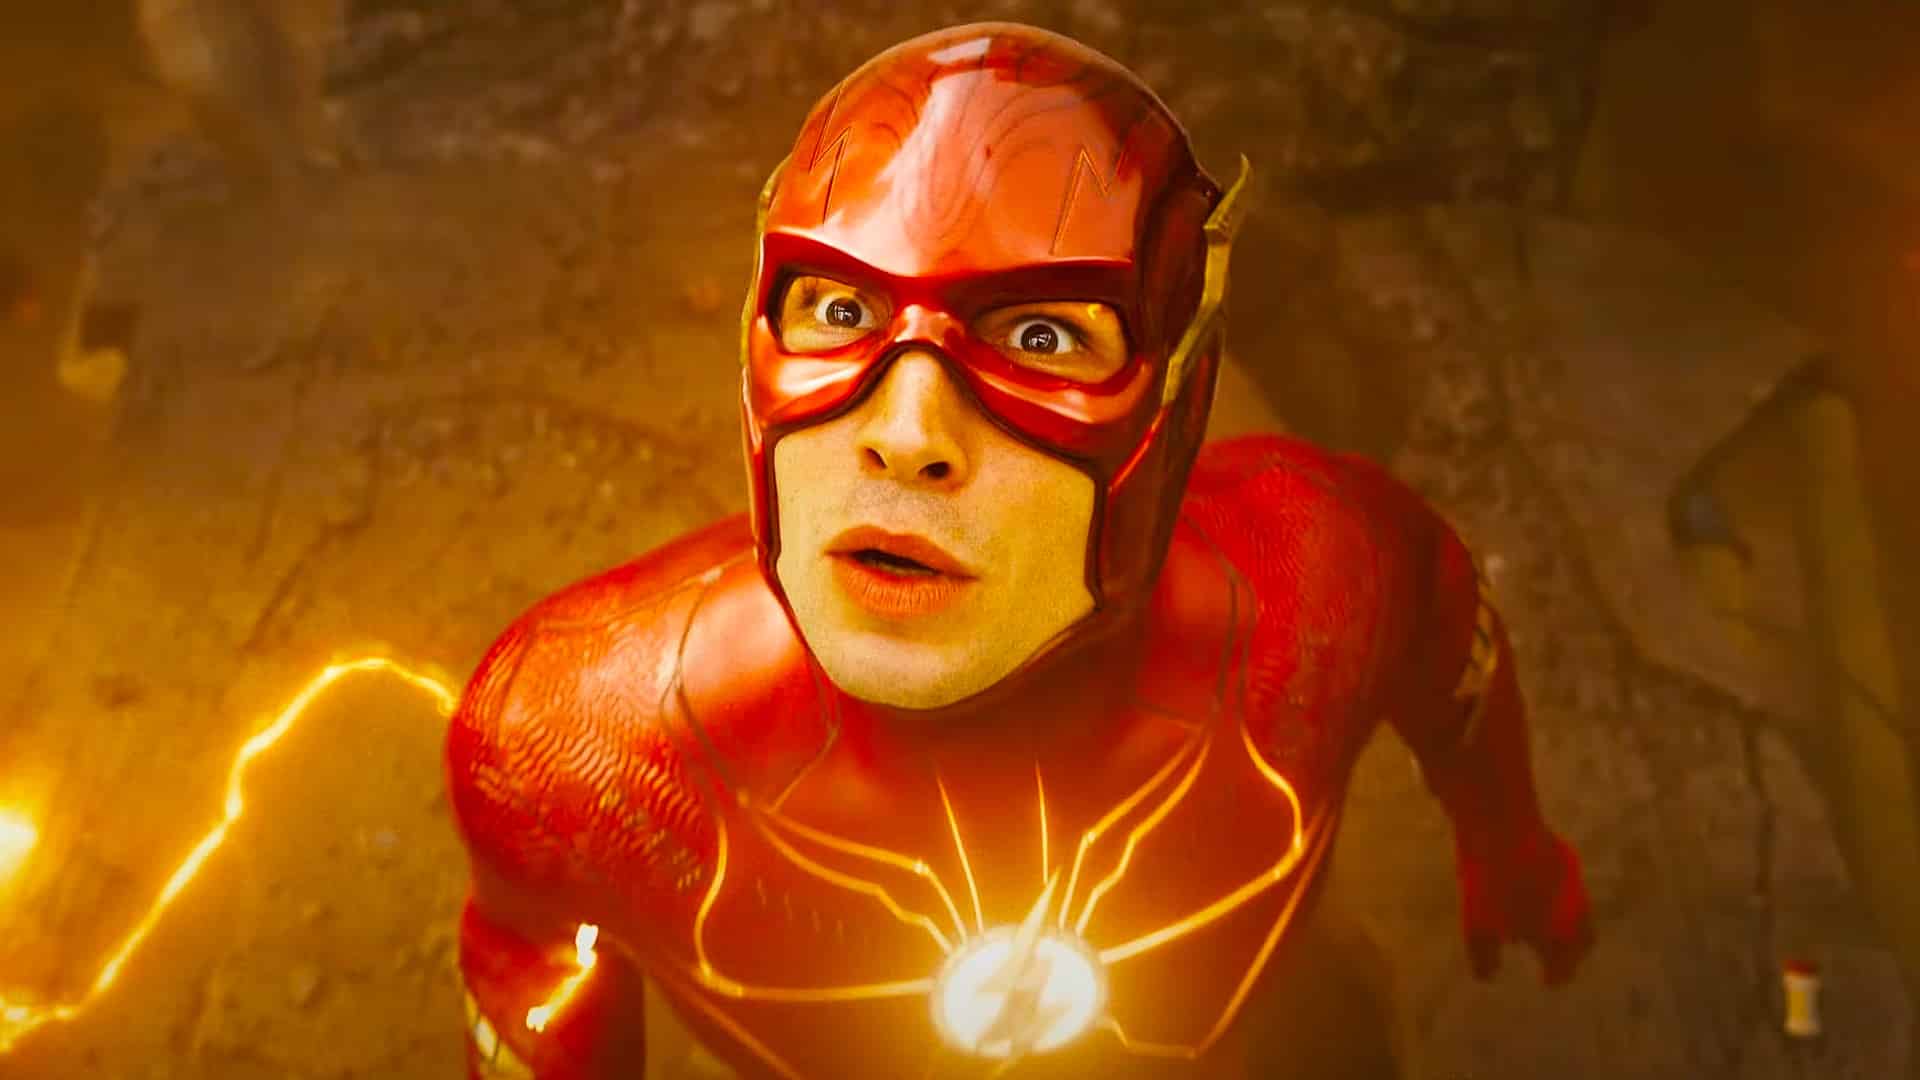 The Flash Movie Review- DC's return or Another Misfire?